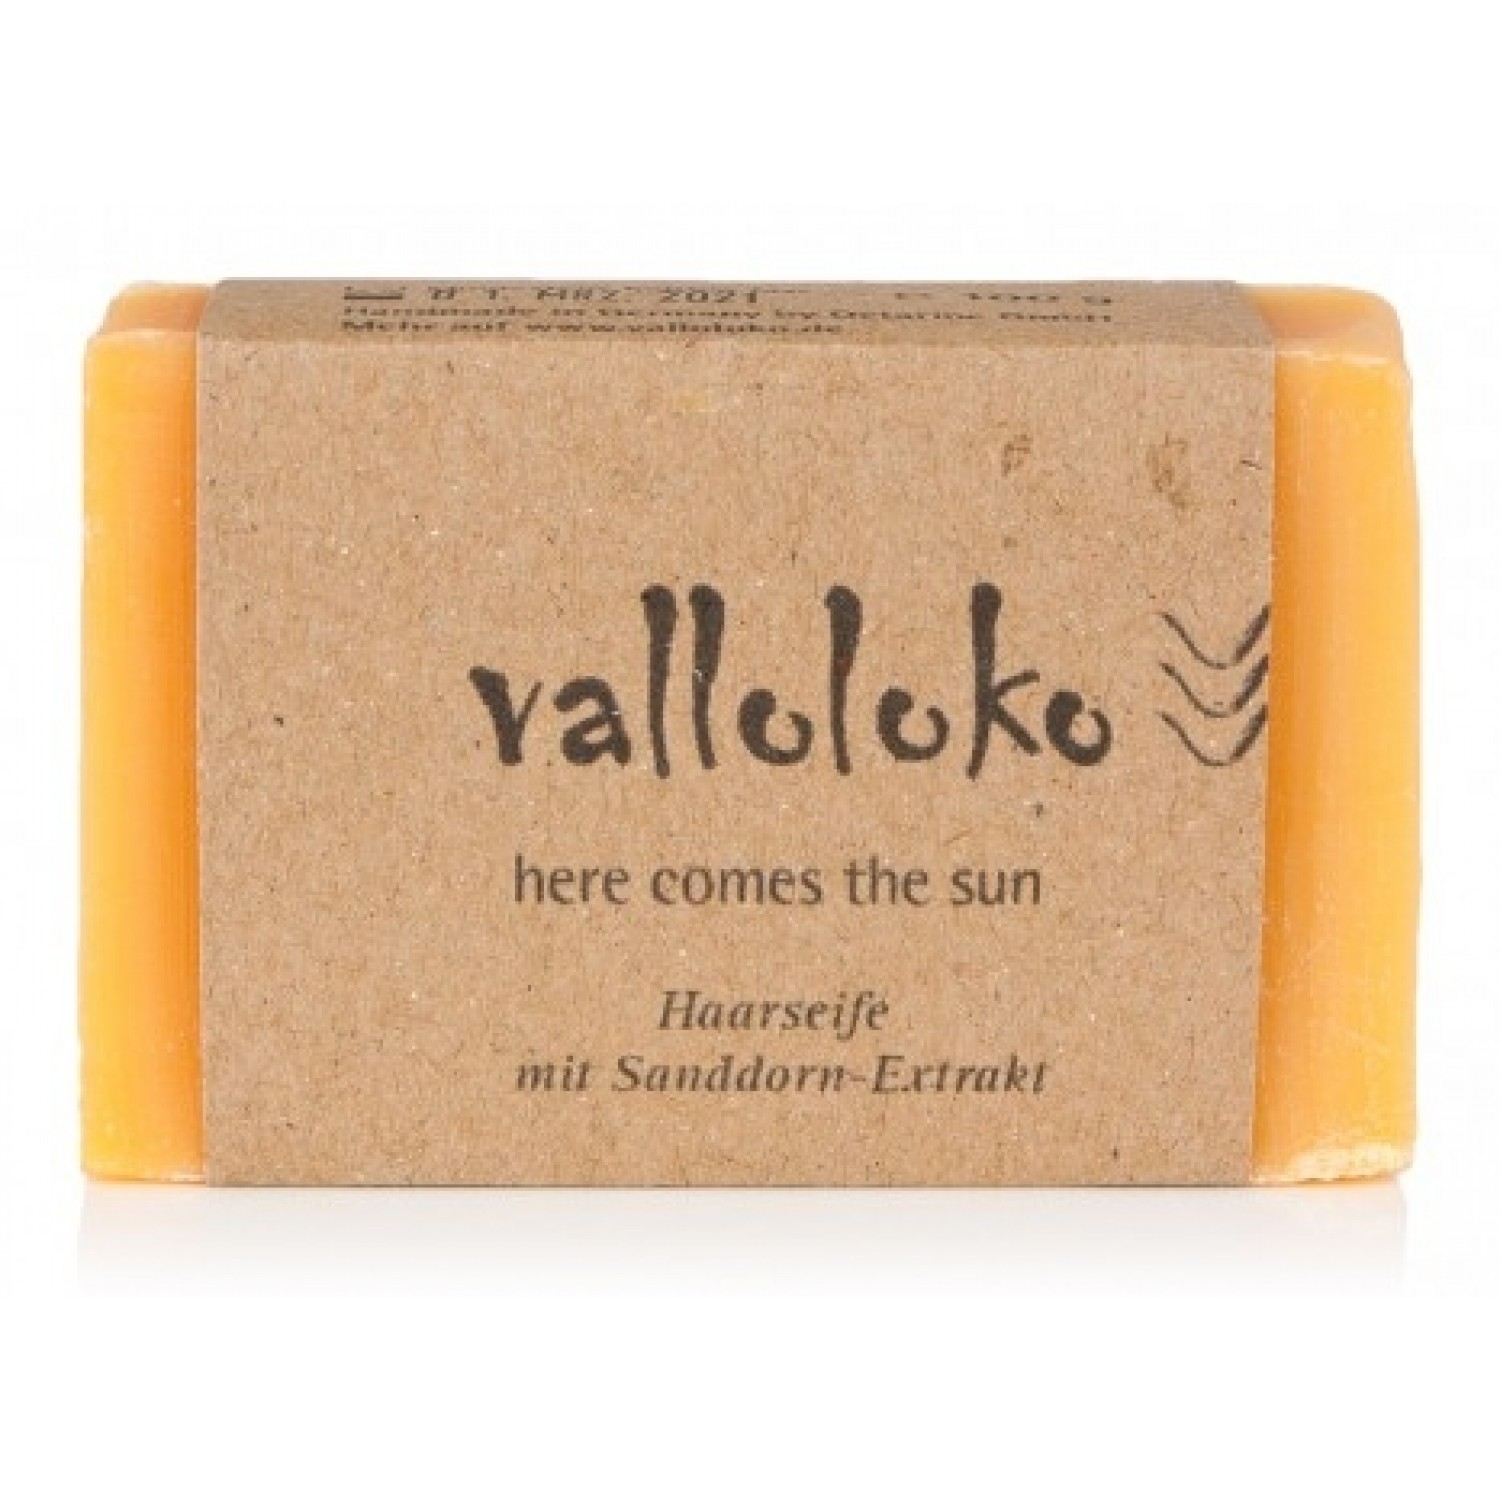 Unverpackte Haarseife Here comes the Sun | Valloloko